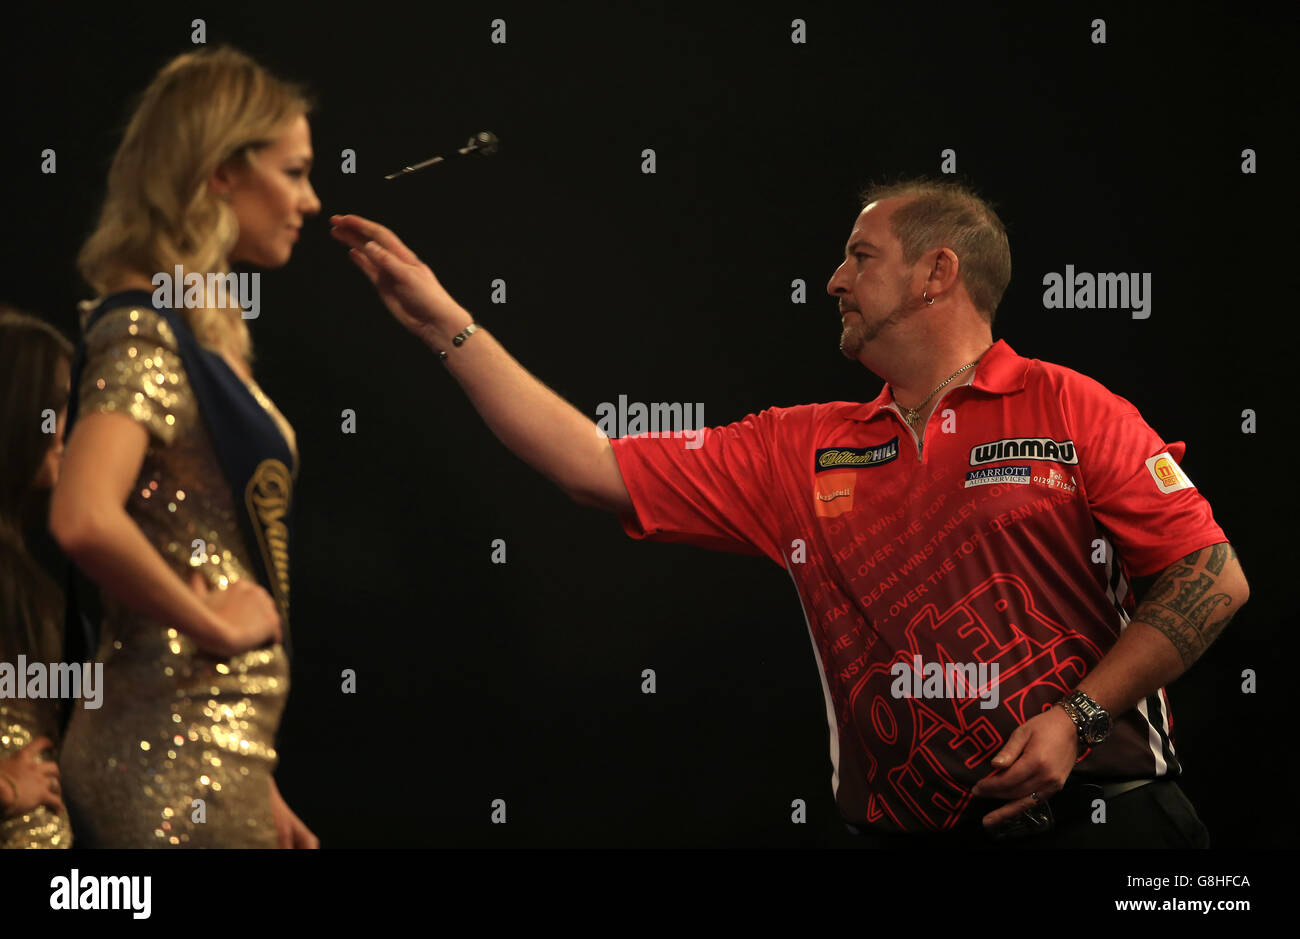 Dean Winstanley during his practice throws as the William Hill walk on girls look on during day six of the William Hill PDC World Championship at Alexandra Palace, London. PRESS ASSOCIATION Photo. Picture date: Tuesday December 22, 2015. See PA story DARTS World. Photo credit should read: John Walton/PA Wire. Use subject to restrictions. . No commercial use. Call +44 (0)1158 447447 for further information. Stock Photo